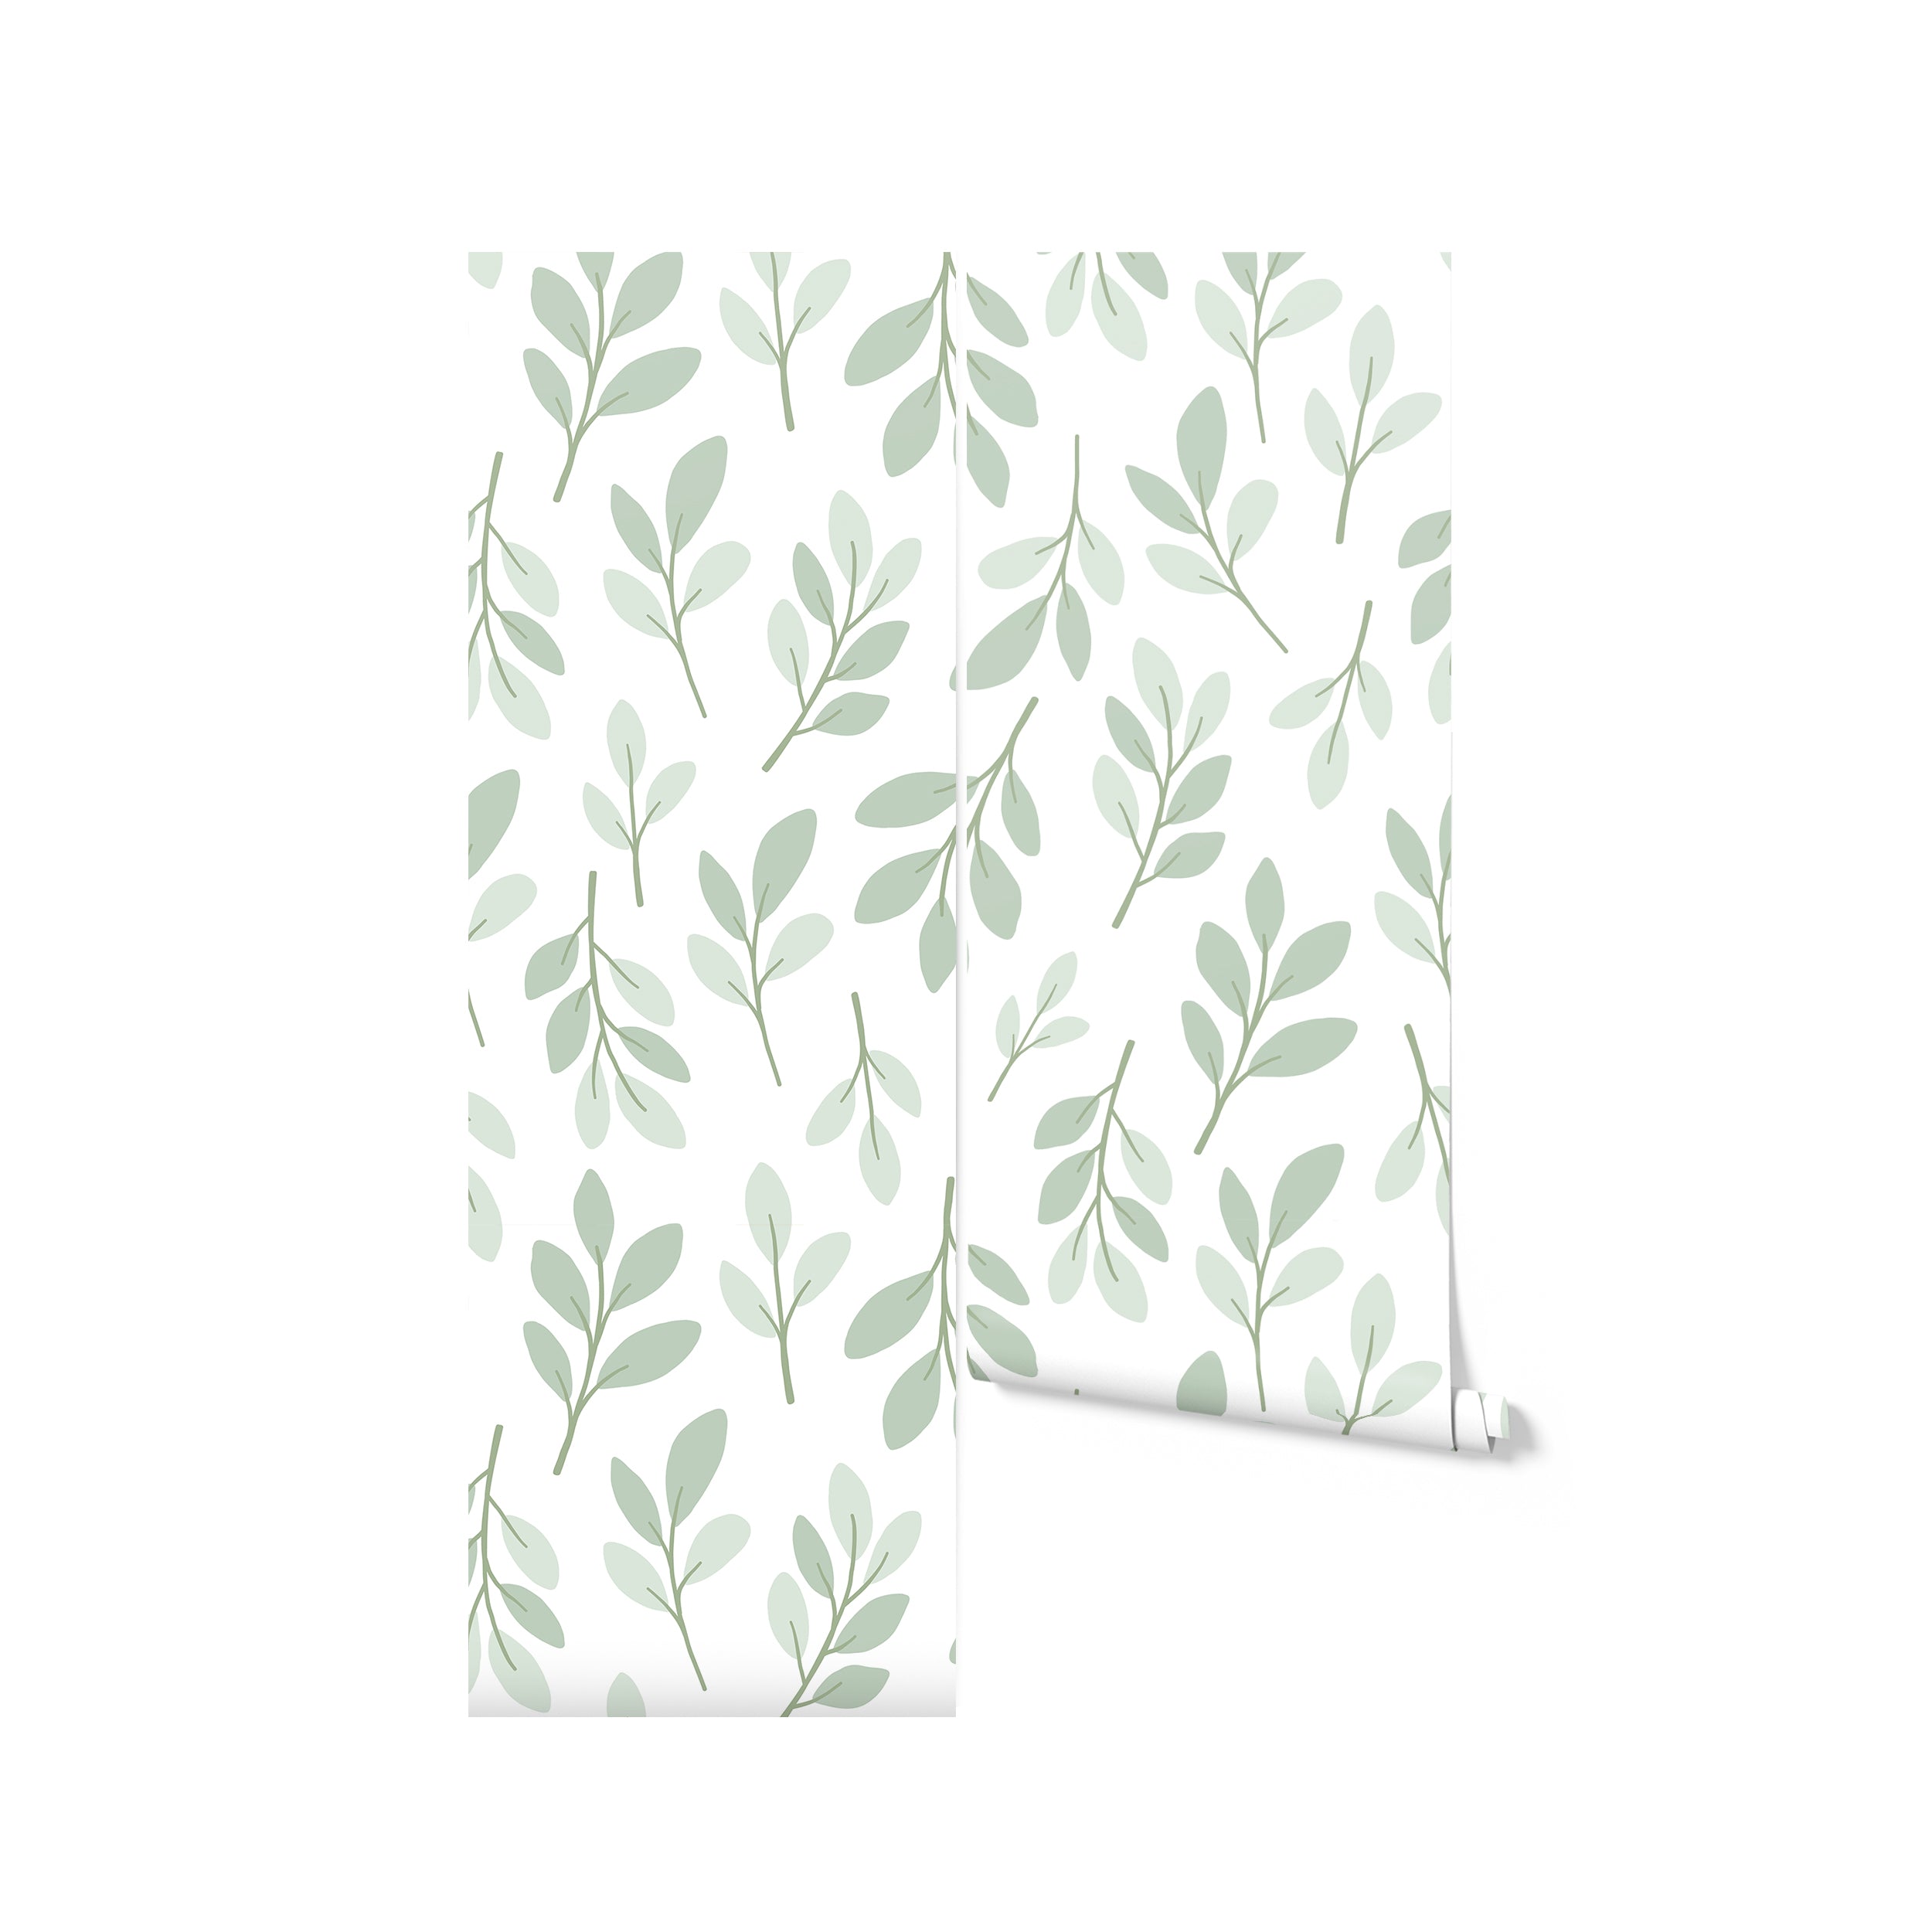 A roll of Easter Leaf Wallpaper showing a clean and minimalist design with soft green leaves scattered across a white background, ideal for bringing a touch of nature and serenity to any room.